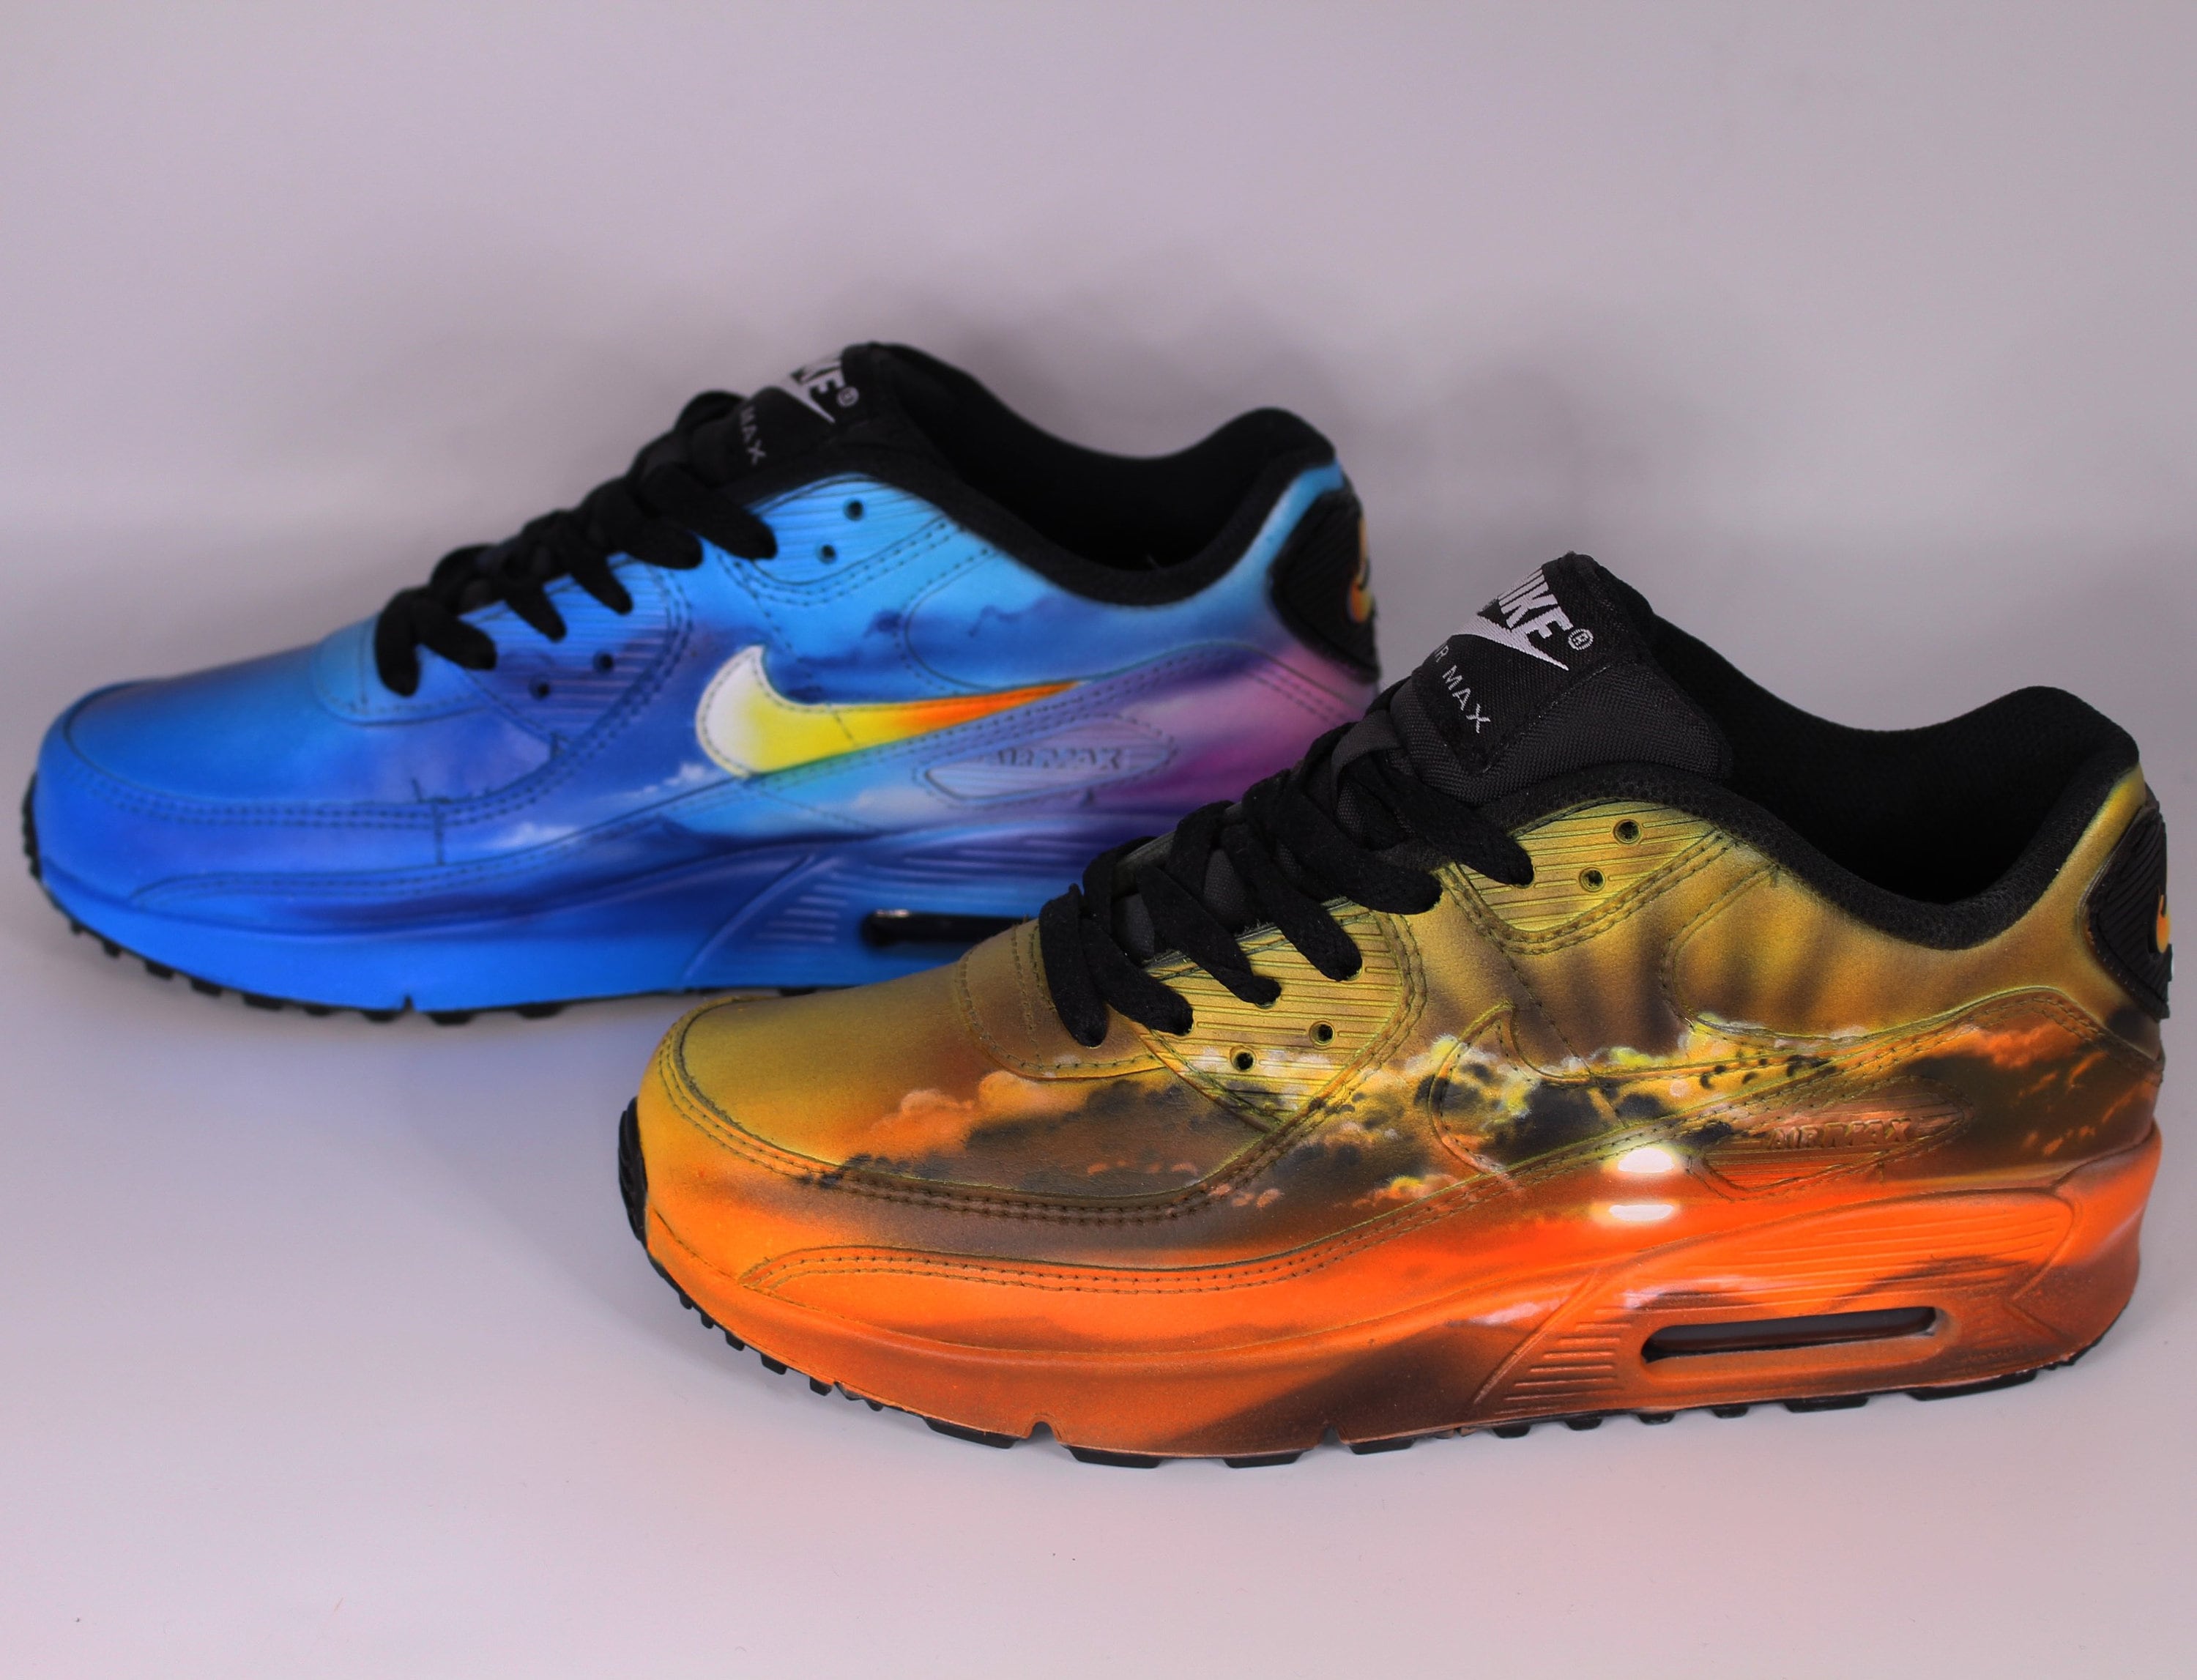 Nike Air Max 90 Blue Galaxy Style Painted Custom Shoes Sneaker 